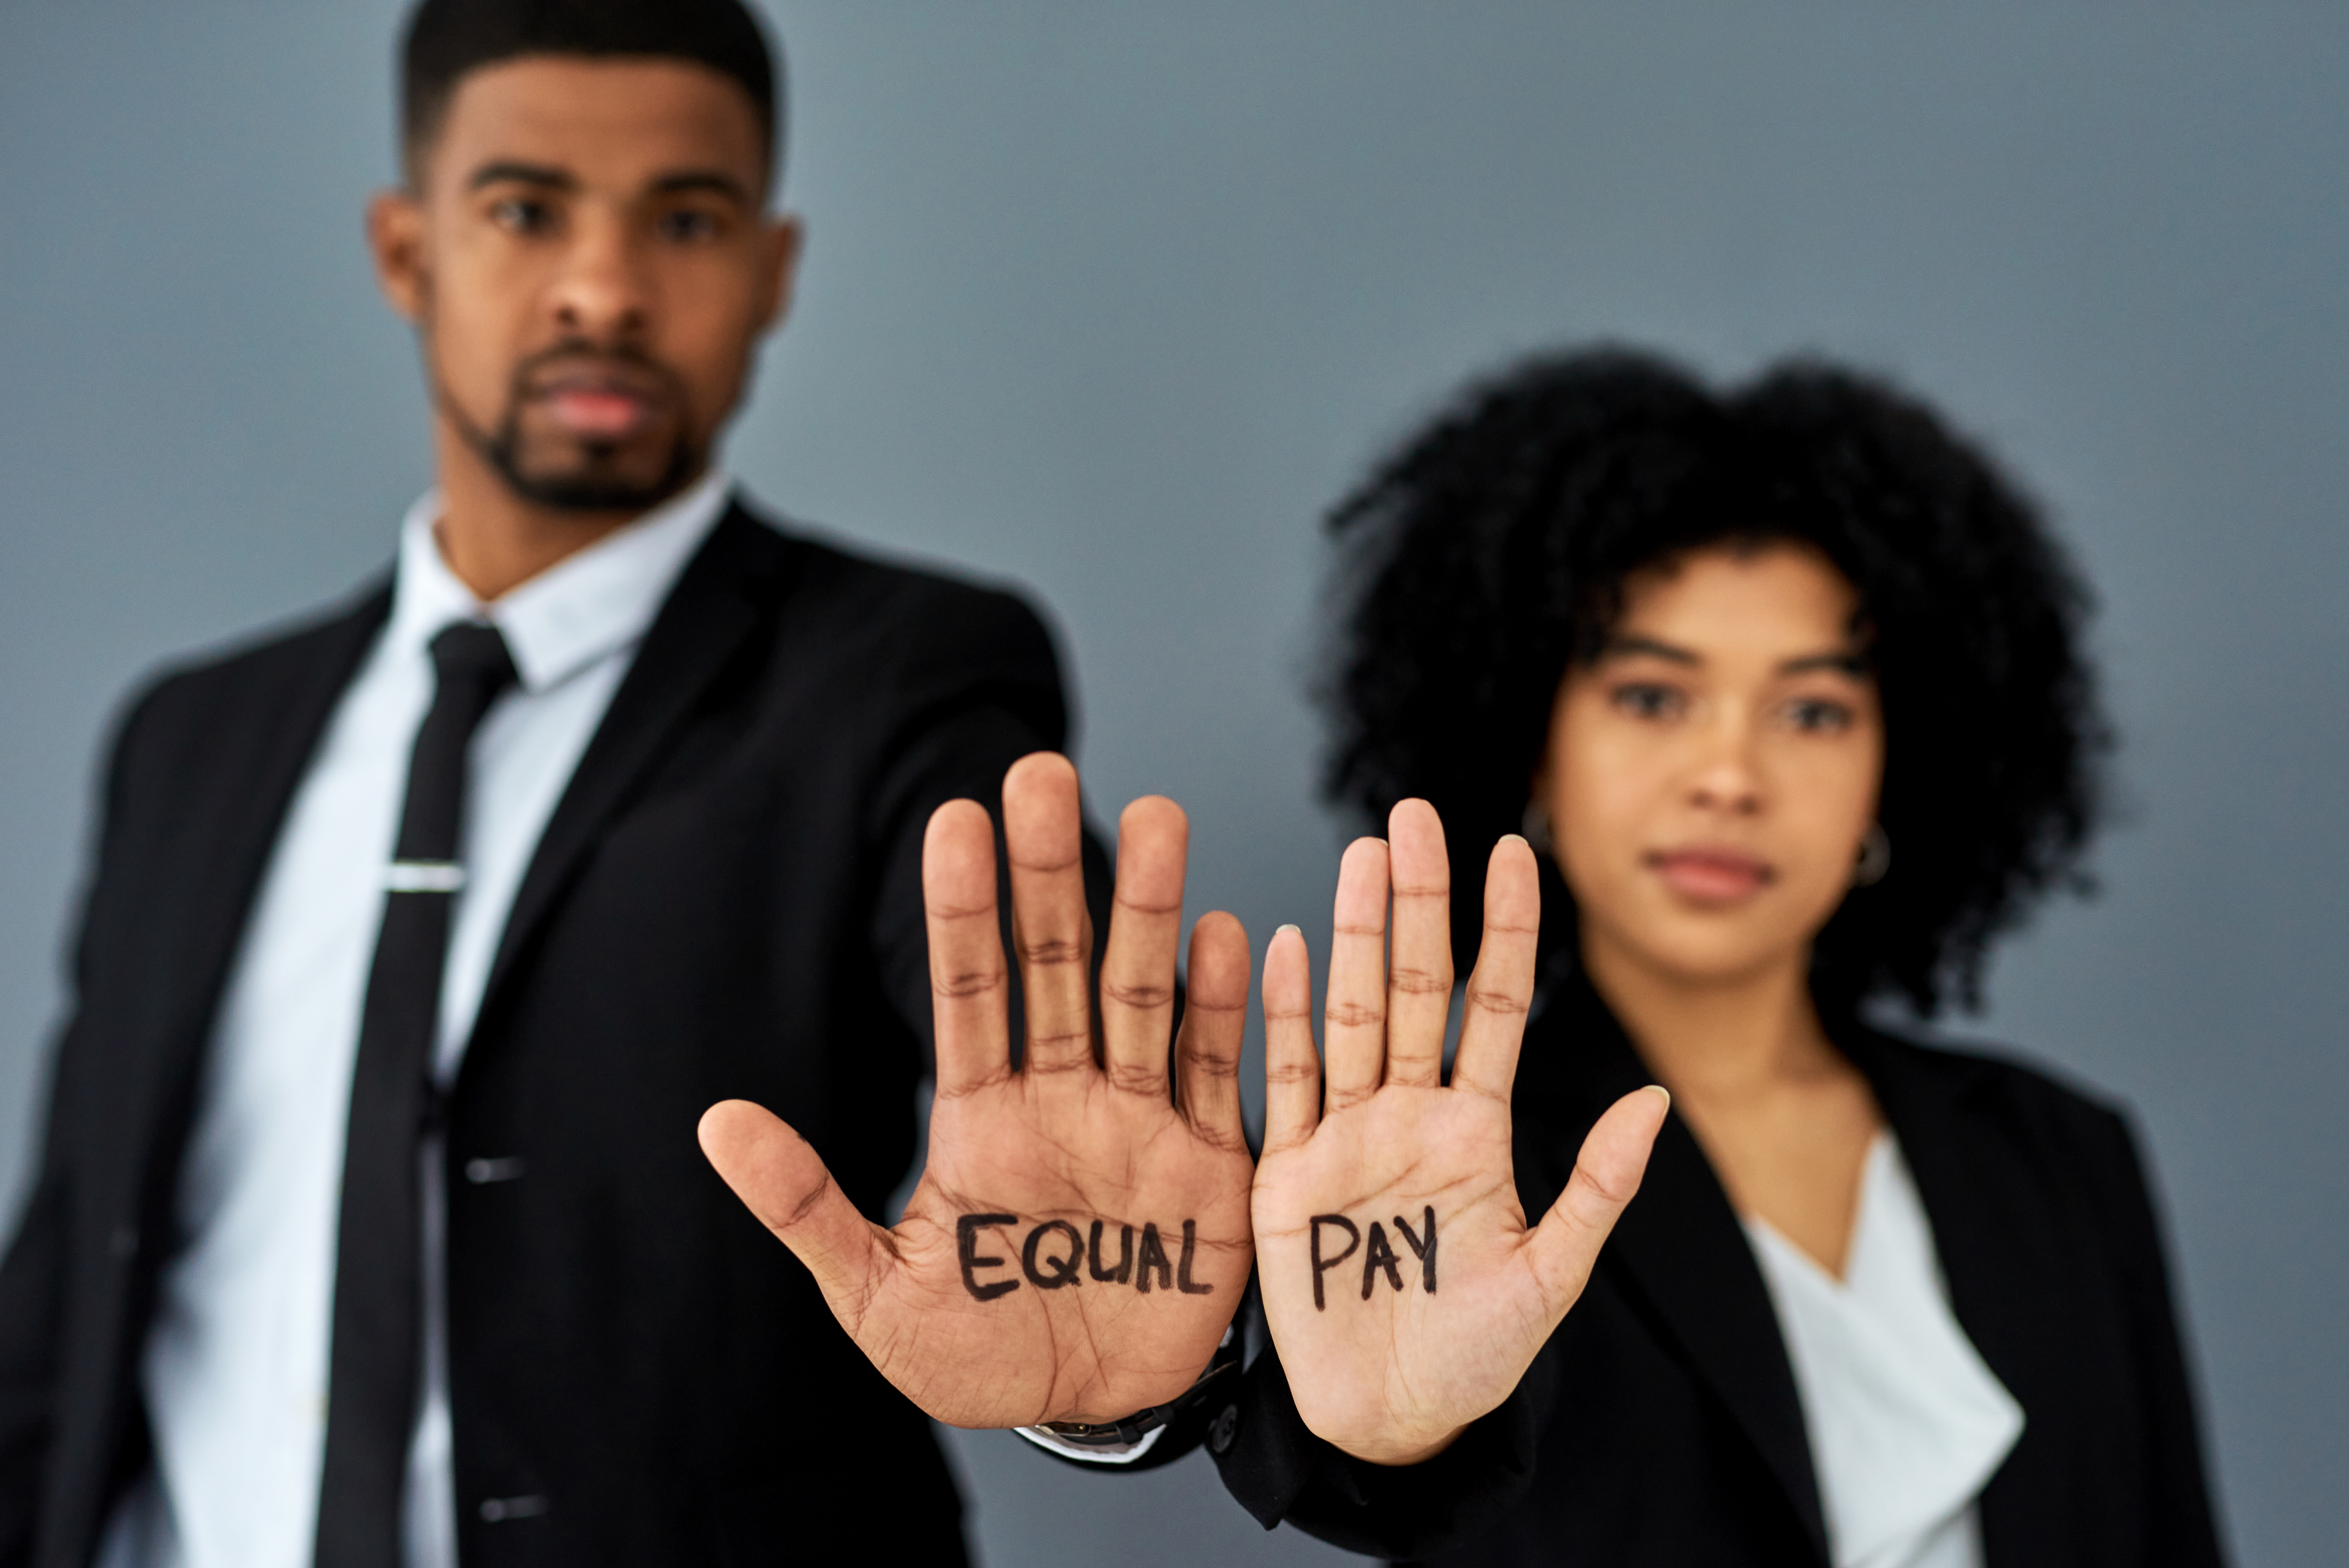 man and woman in business attire with equal pay written on their hands